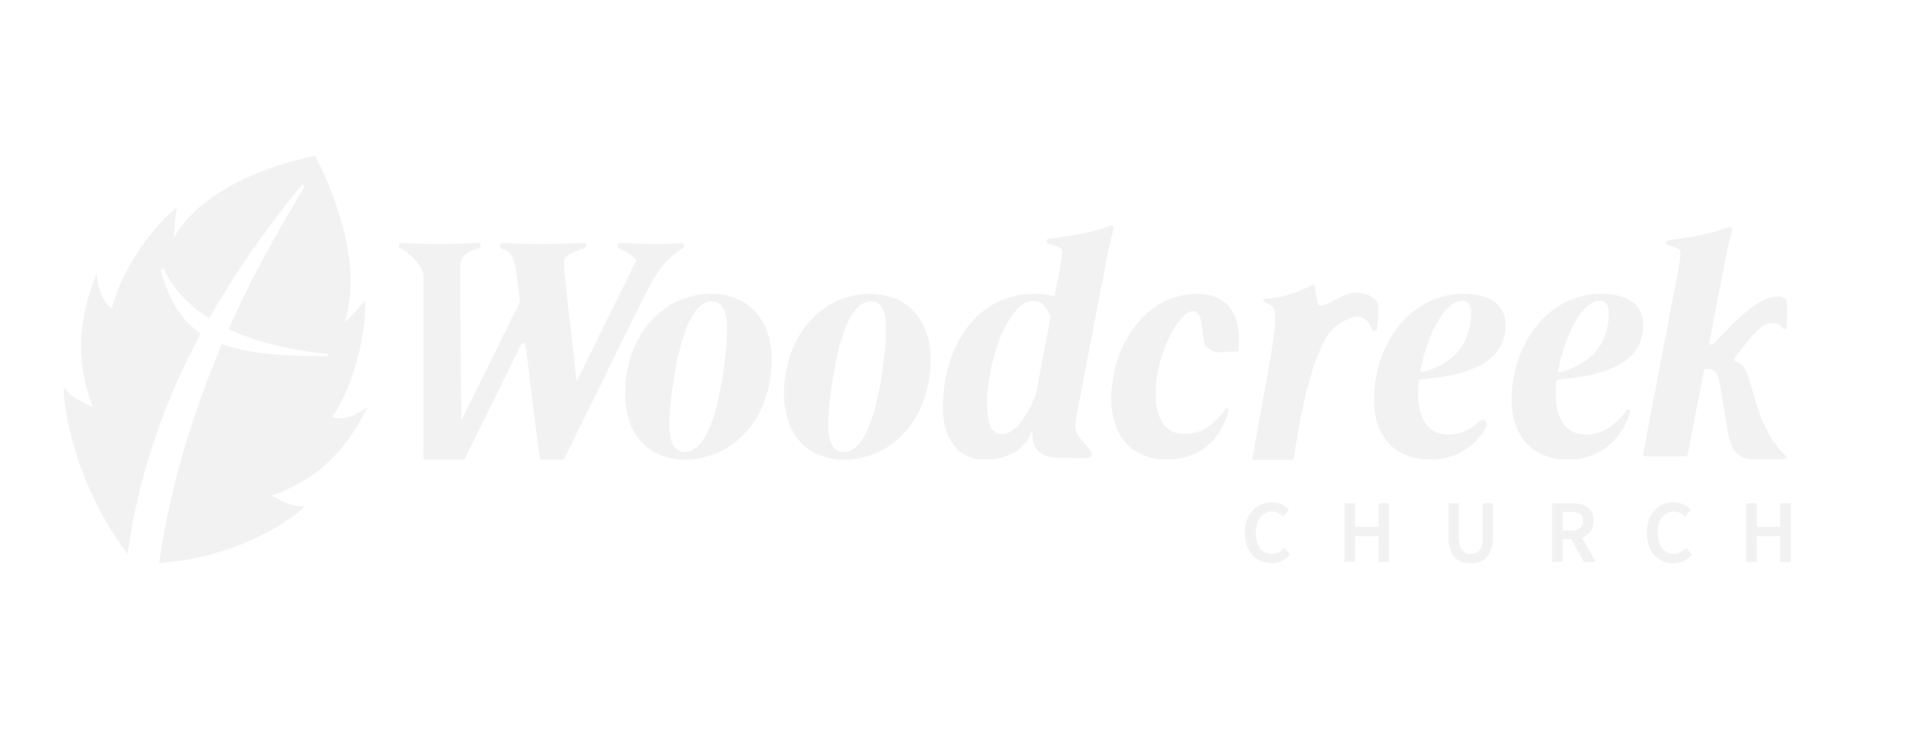 A green background with the word woodcraft written in white.